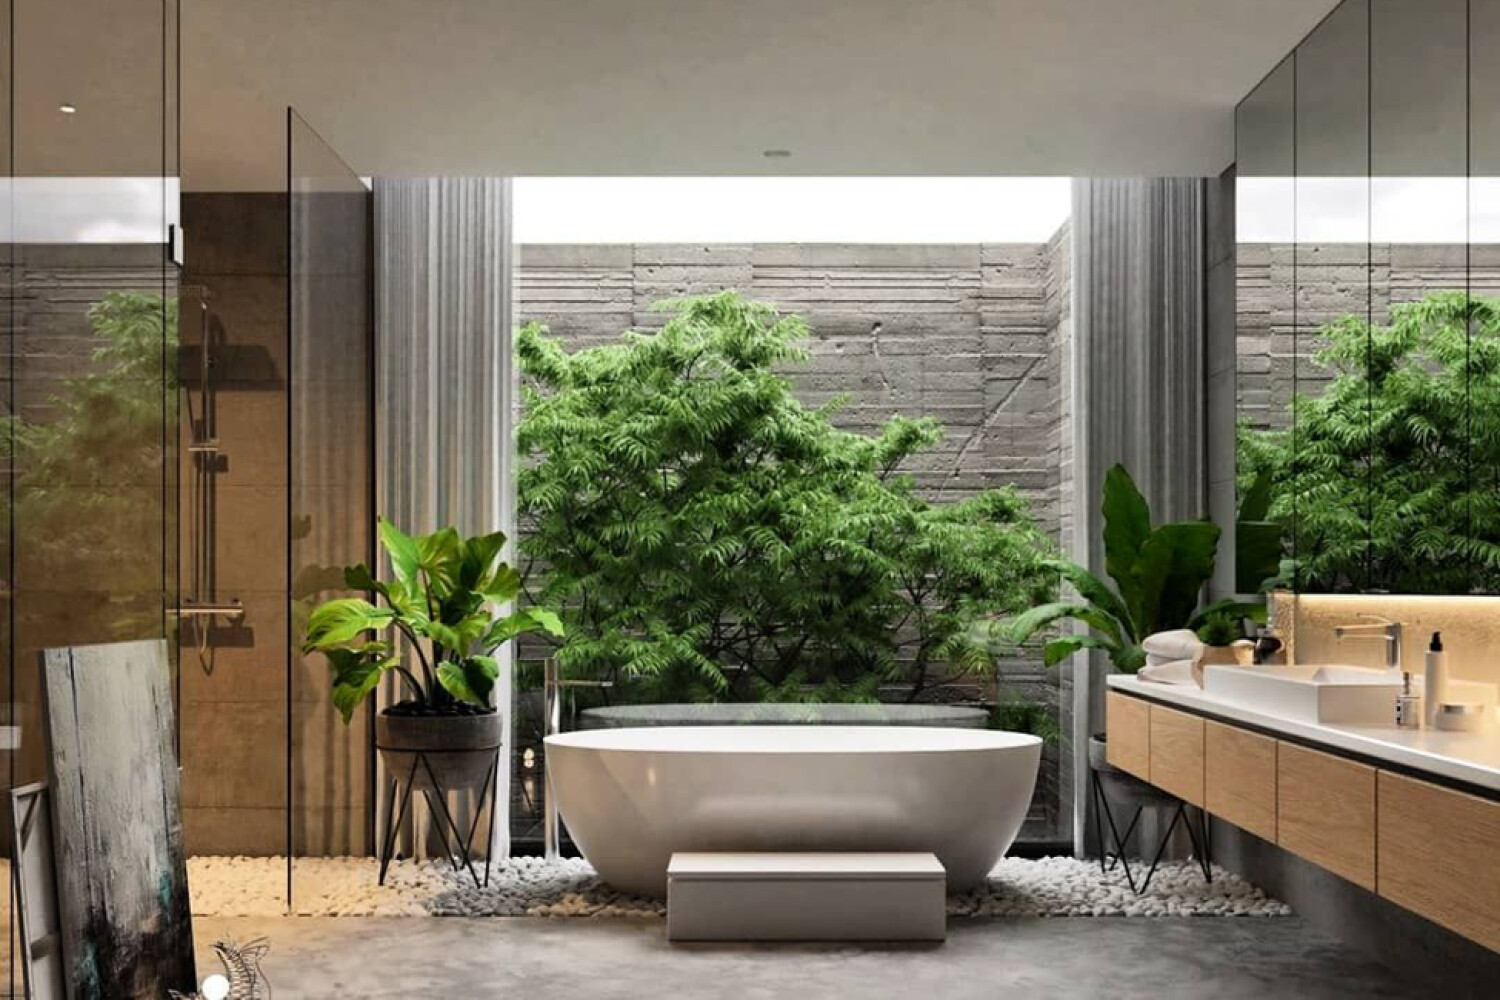 Benefits of Incorporating Natural Elements into Your Home Design